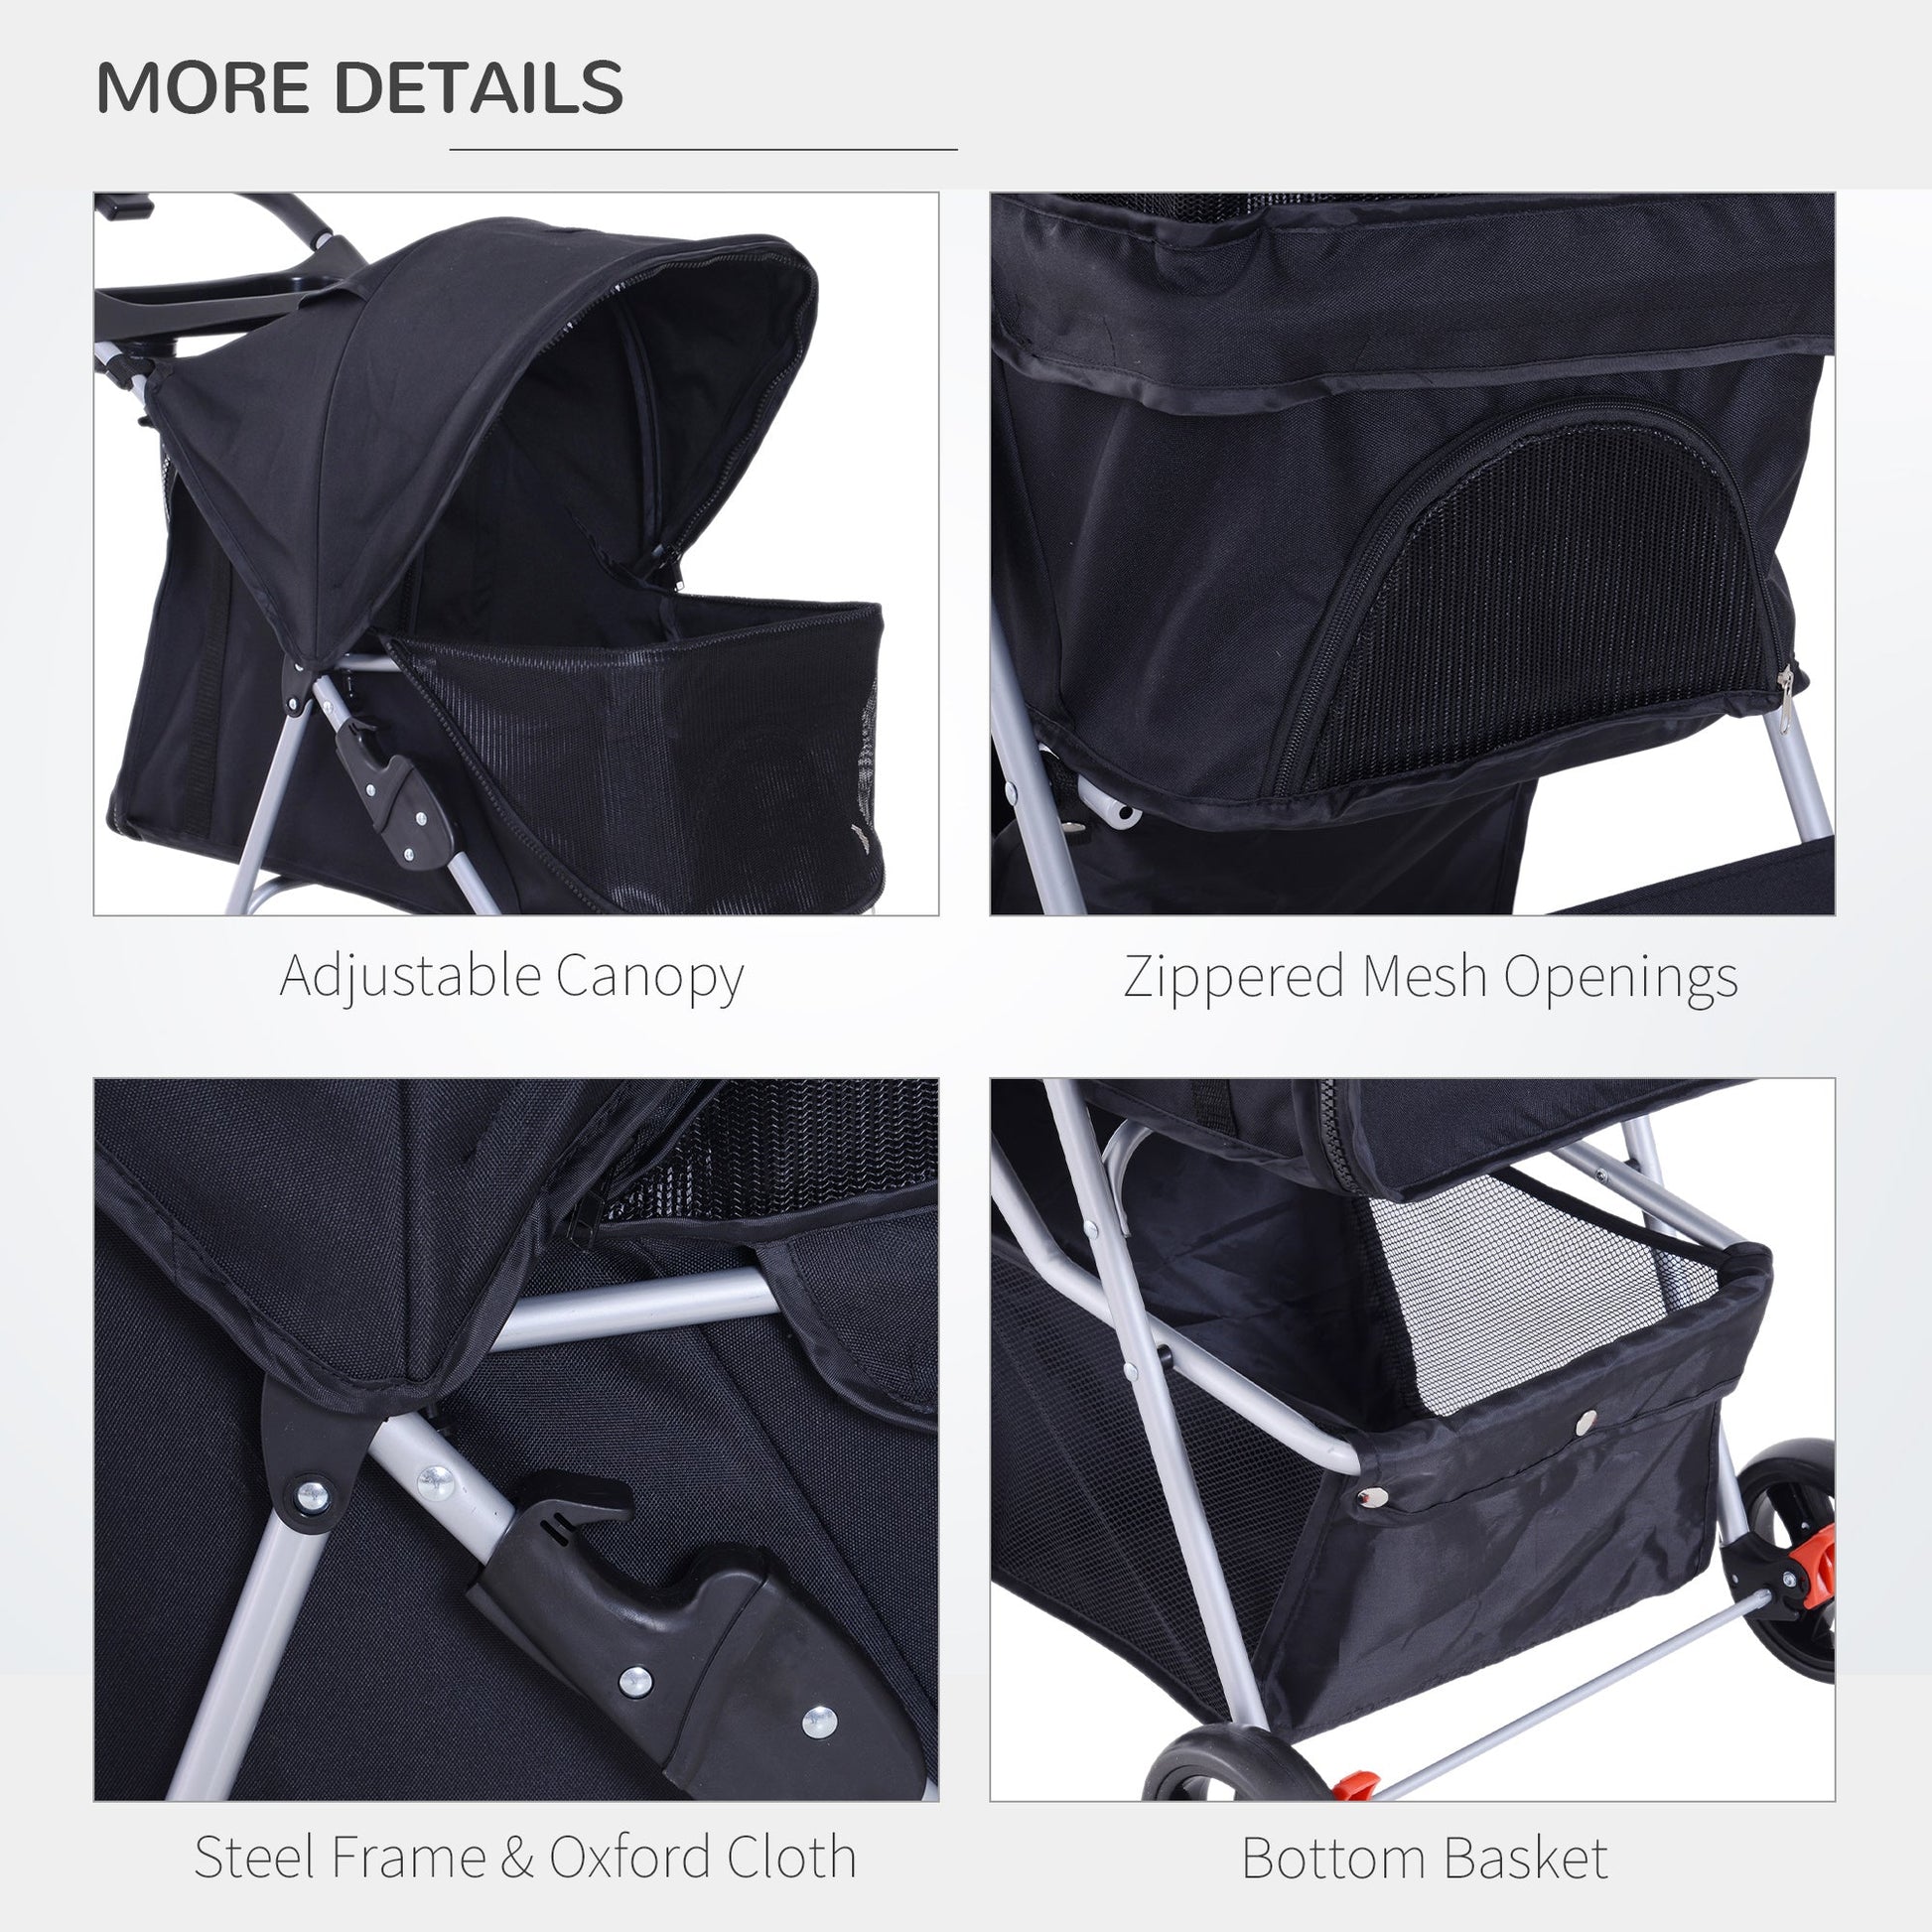 Pet Stroller Foldable Carrier for Cat, Dog and More 4 Wheels Travel Jogger with Cup Holder, Storage Basket, 360 ° swiveling front wheels, Easy Fold, Black at Gallery Canada